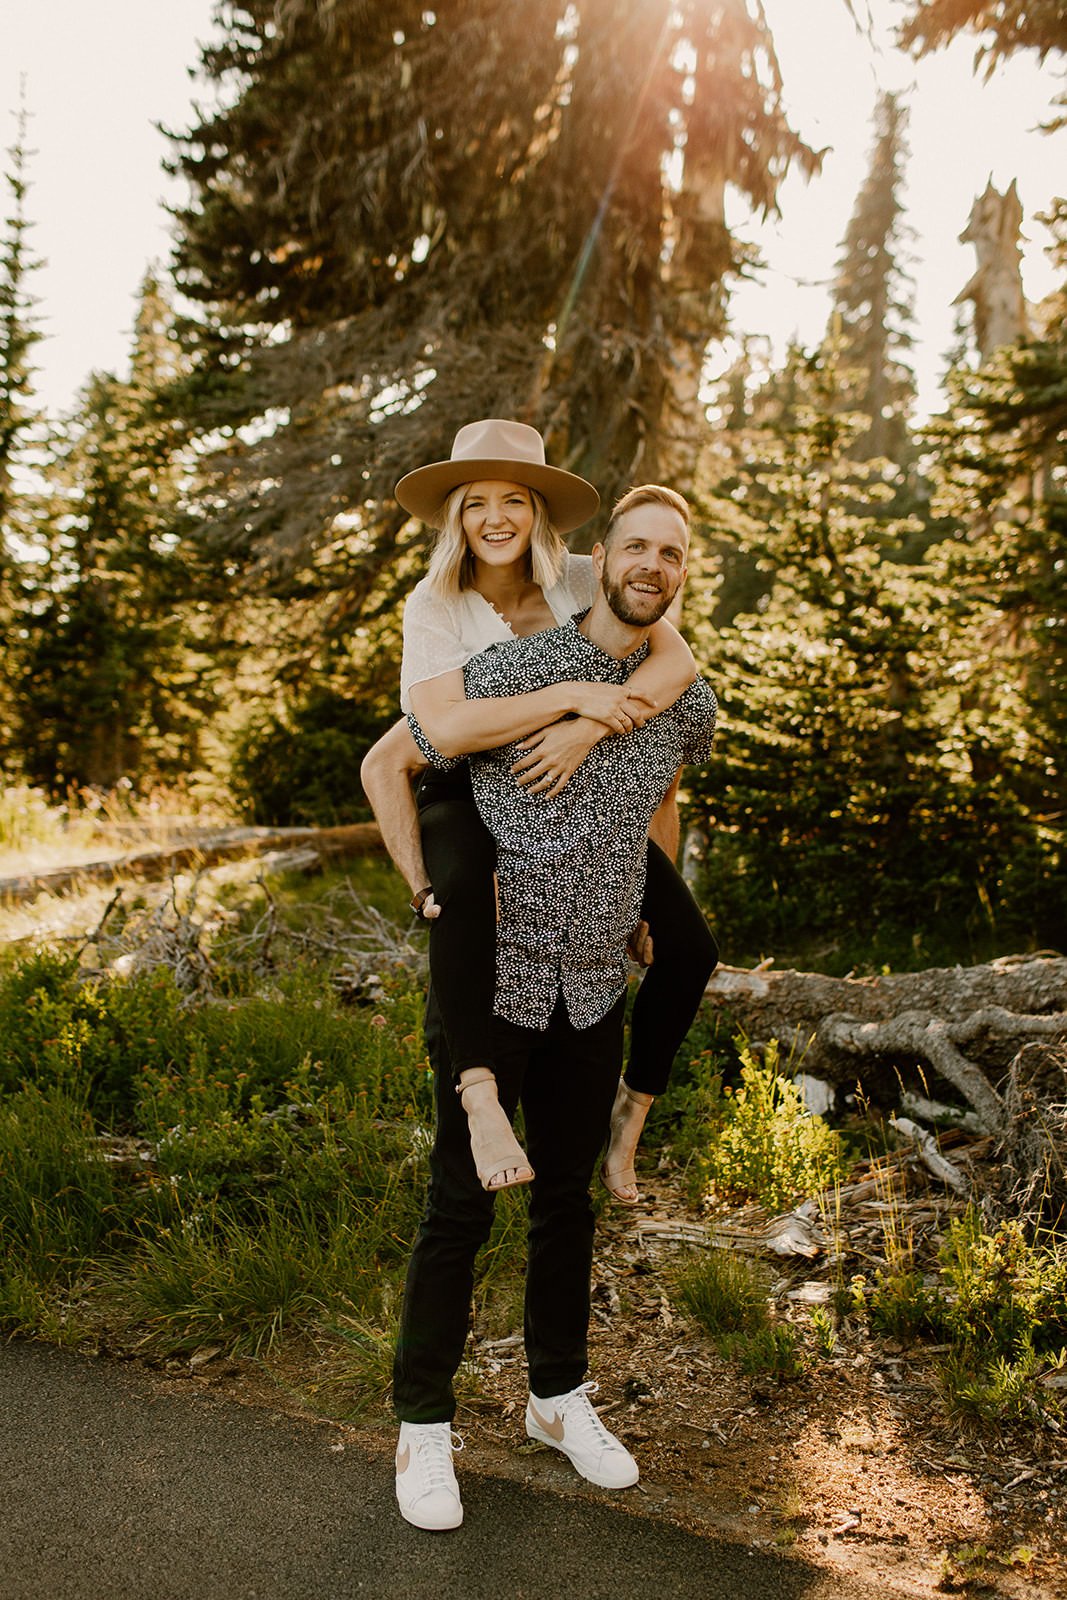 Fiance giving his partner a piggy-back ride in the forest of mt. rainier